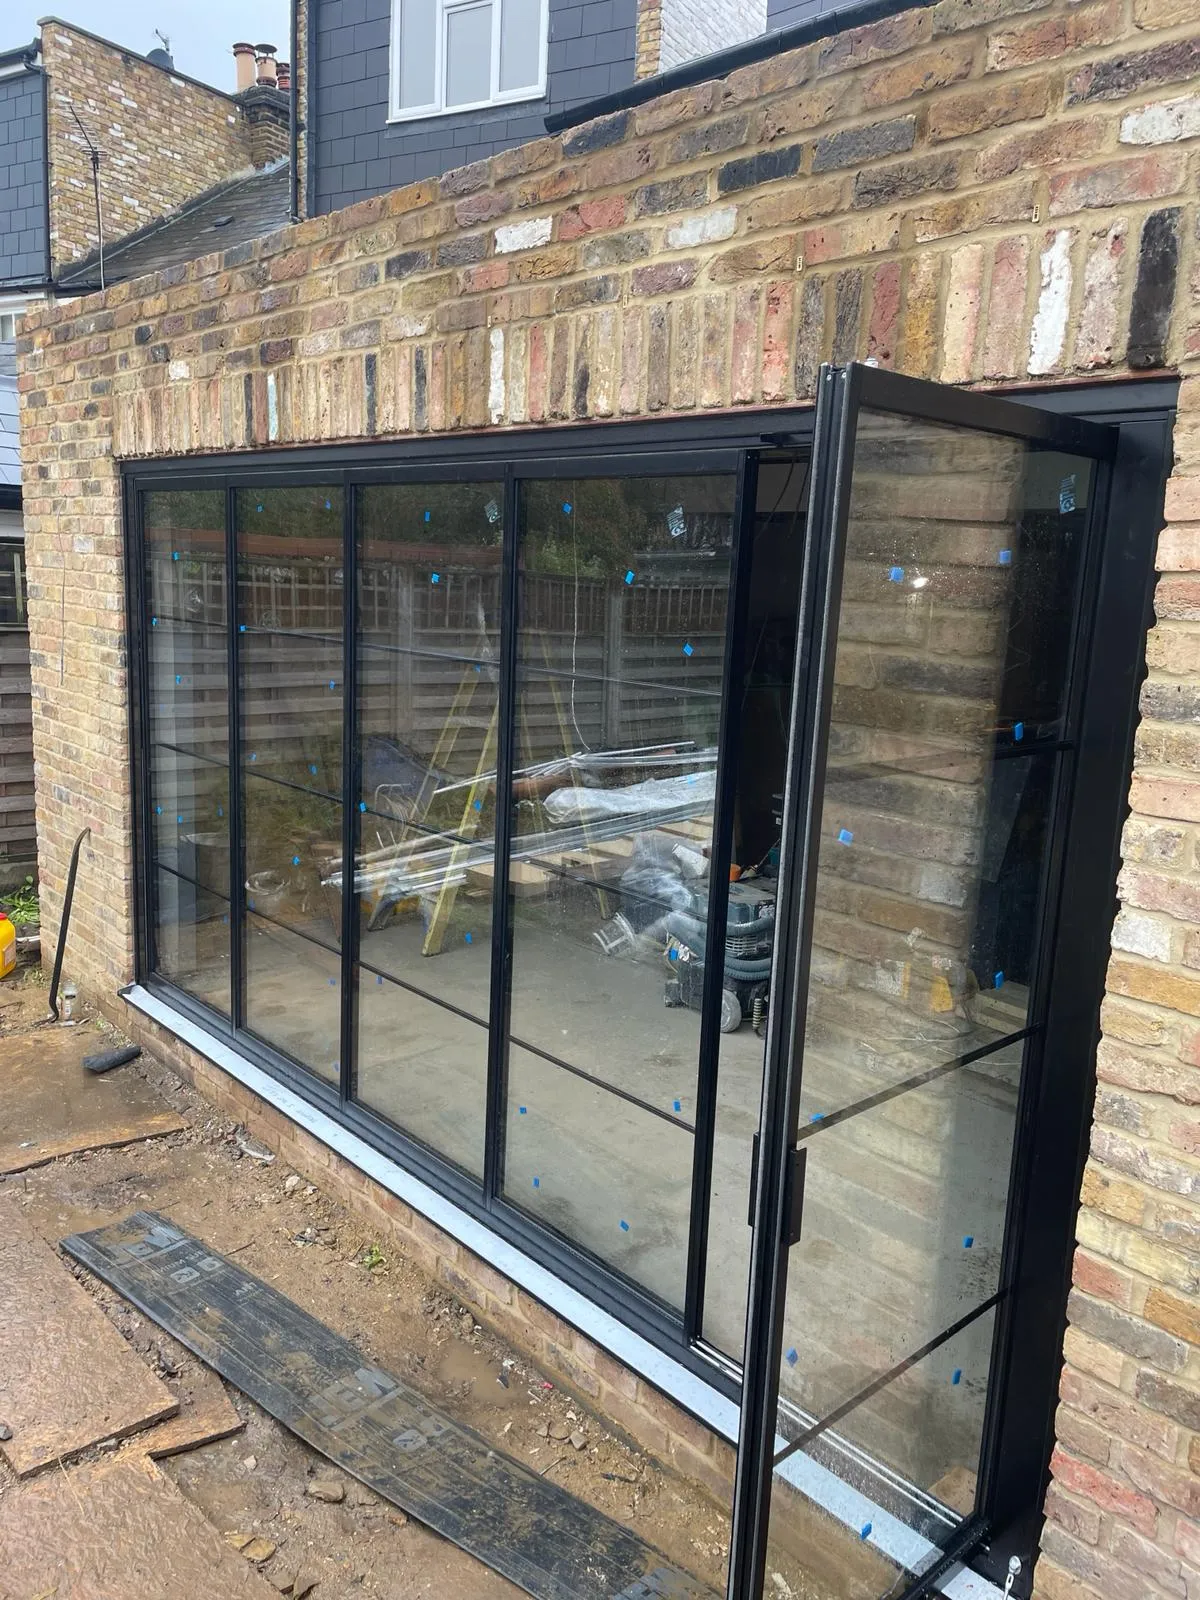 Folding sliding glass doors installation in the UK on a modern home by a patio. By Vision Glass Doors